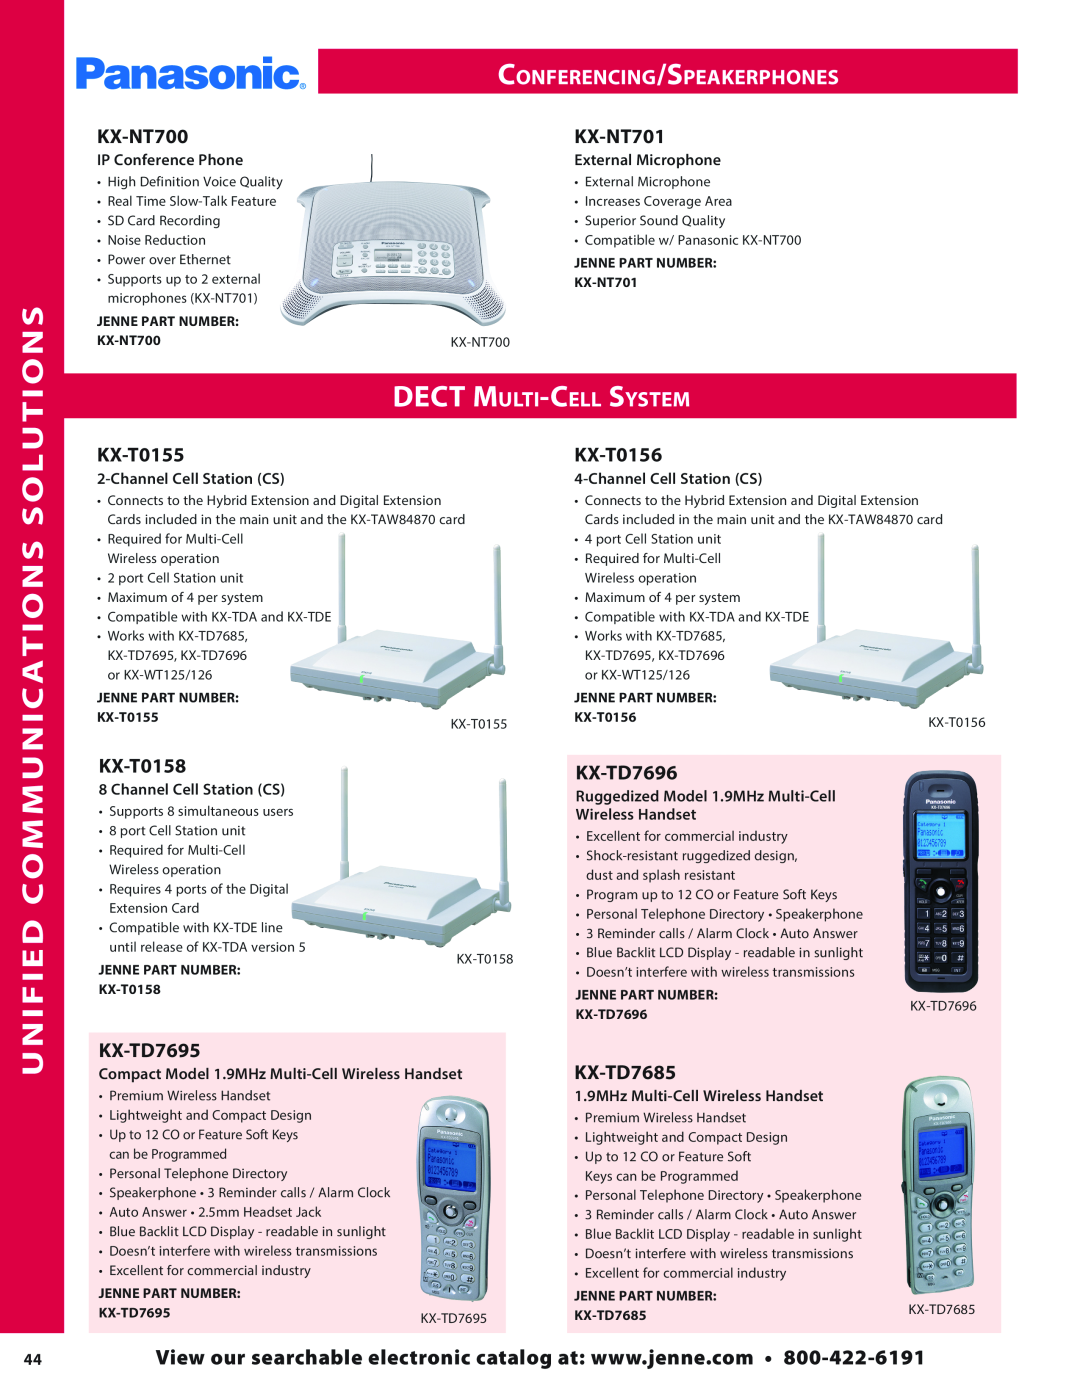 Panasonic PMPU2000 manual Communications Solutions, Unified, Conferencing/Speakerphones, DECT Multi-Cell System 